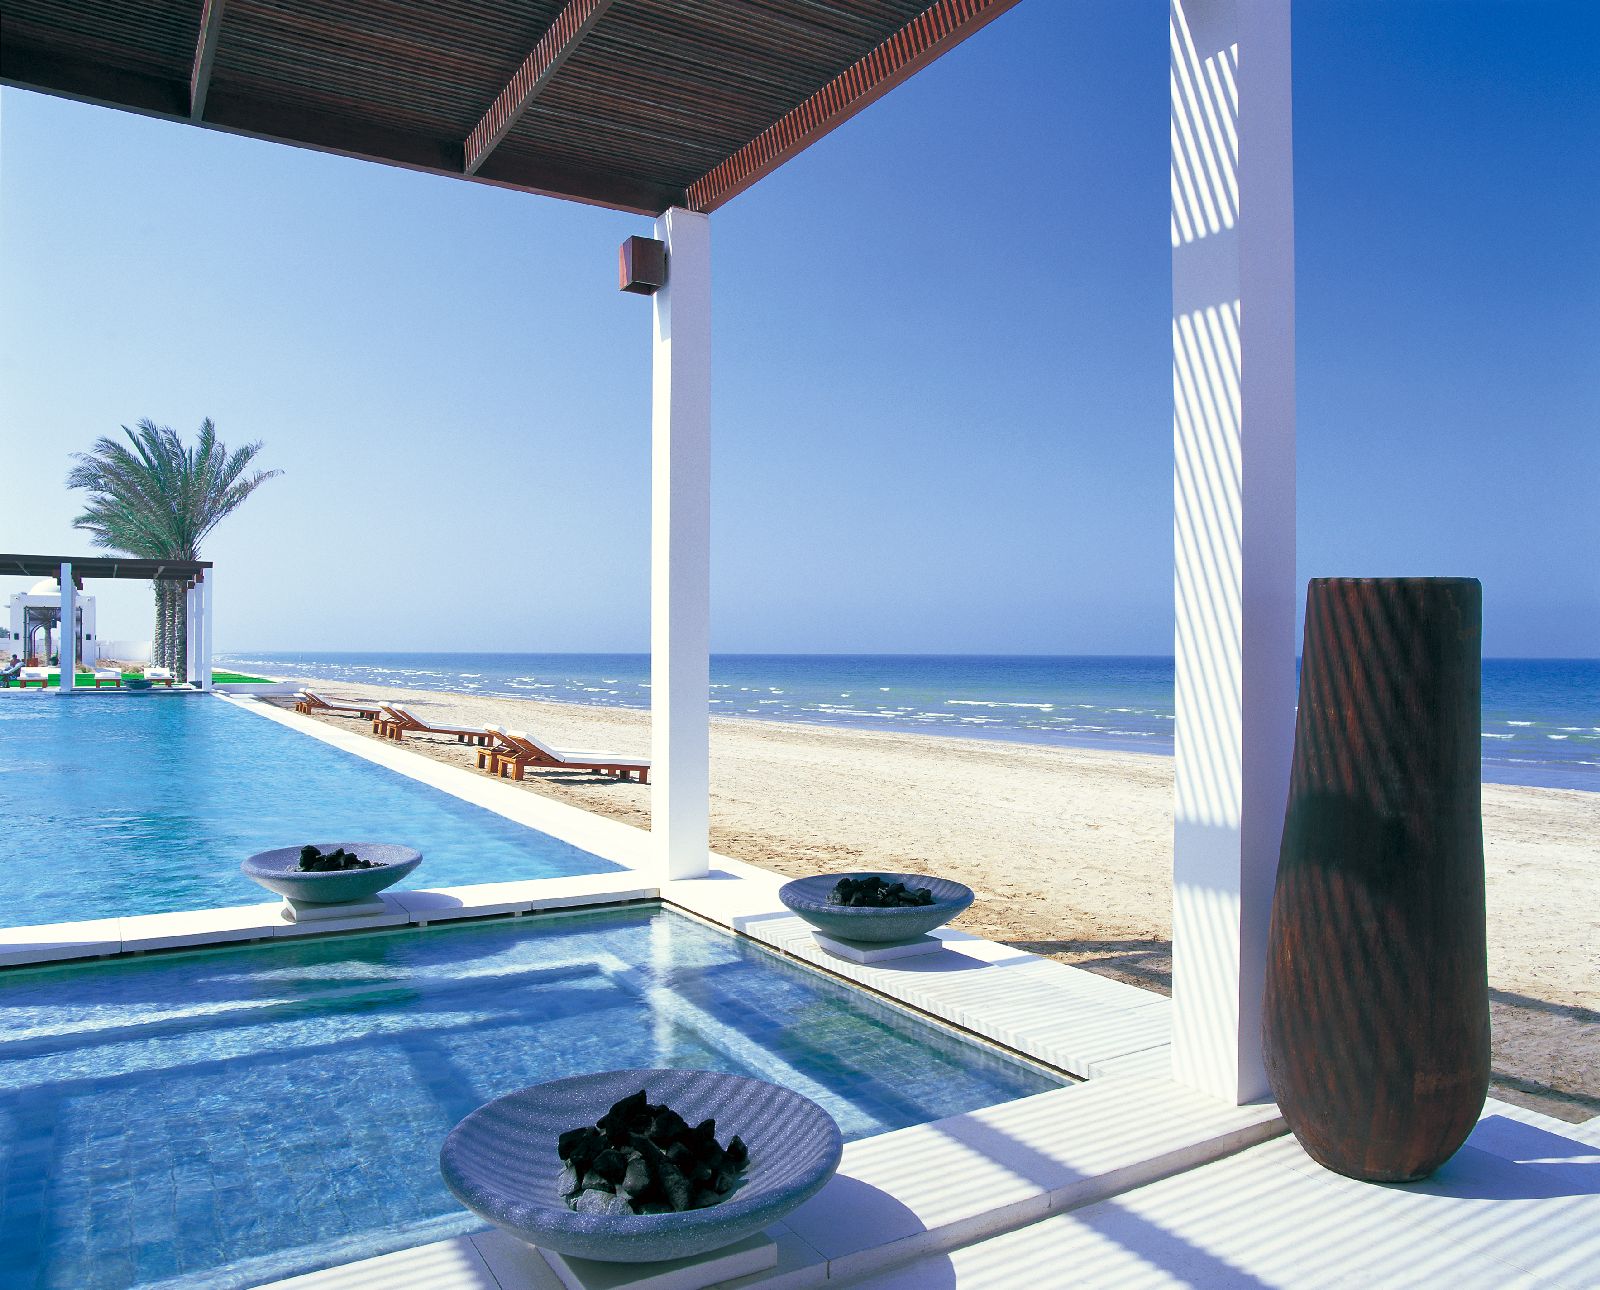 Swimming pool and beach at the Chedi Muscat in Oman